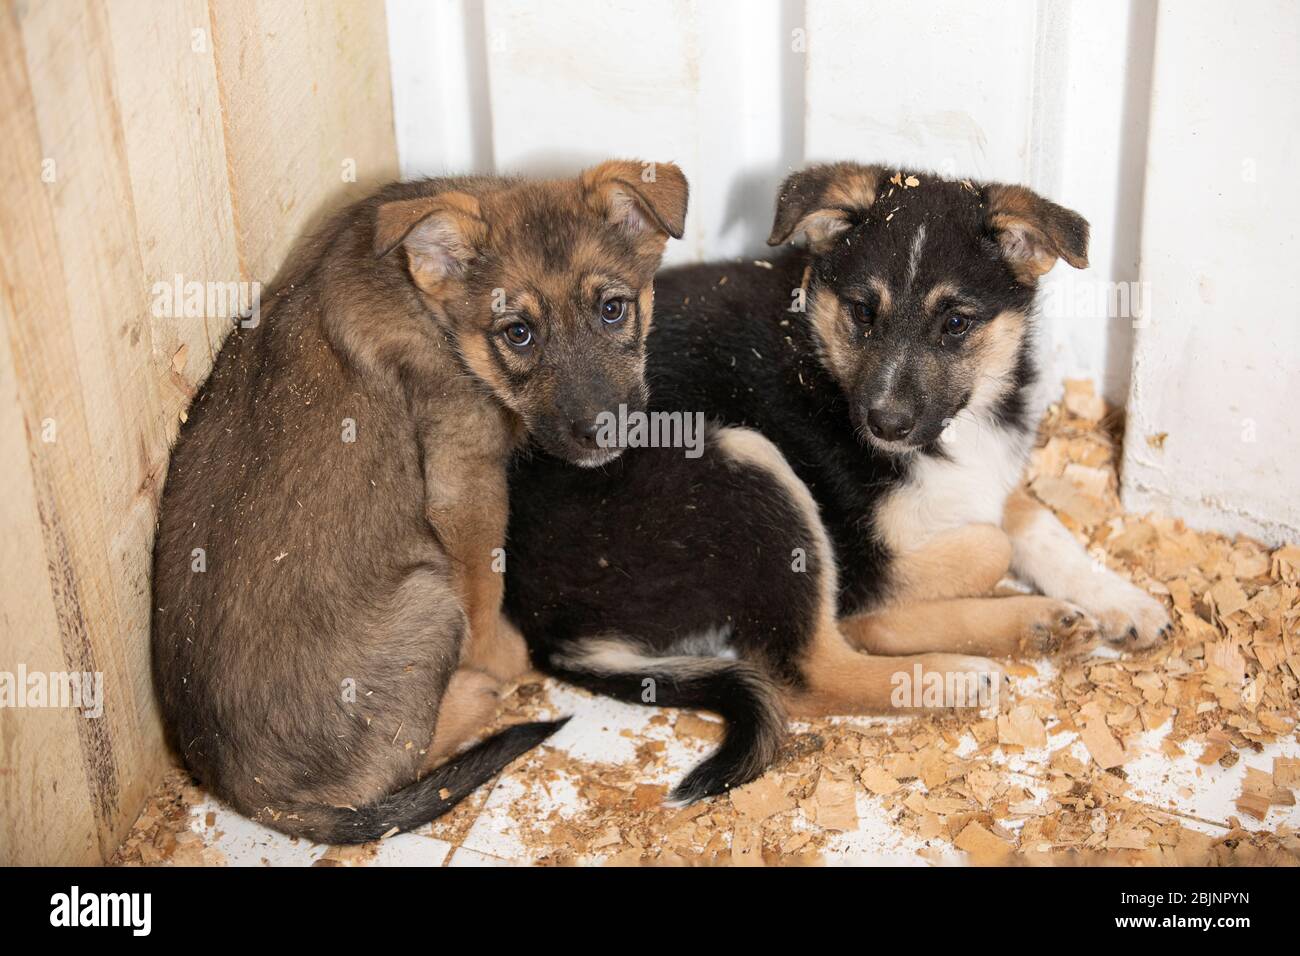 Couple of cute adorable little puppies occupying corner of enclosure and lying close together on wooden sawdust, looking forward with wariness and fea Stock Photo